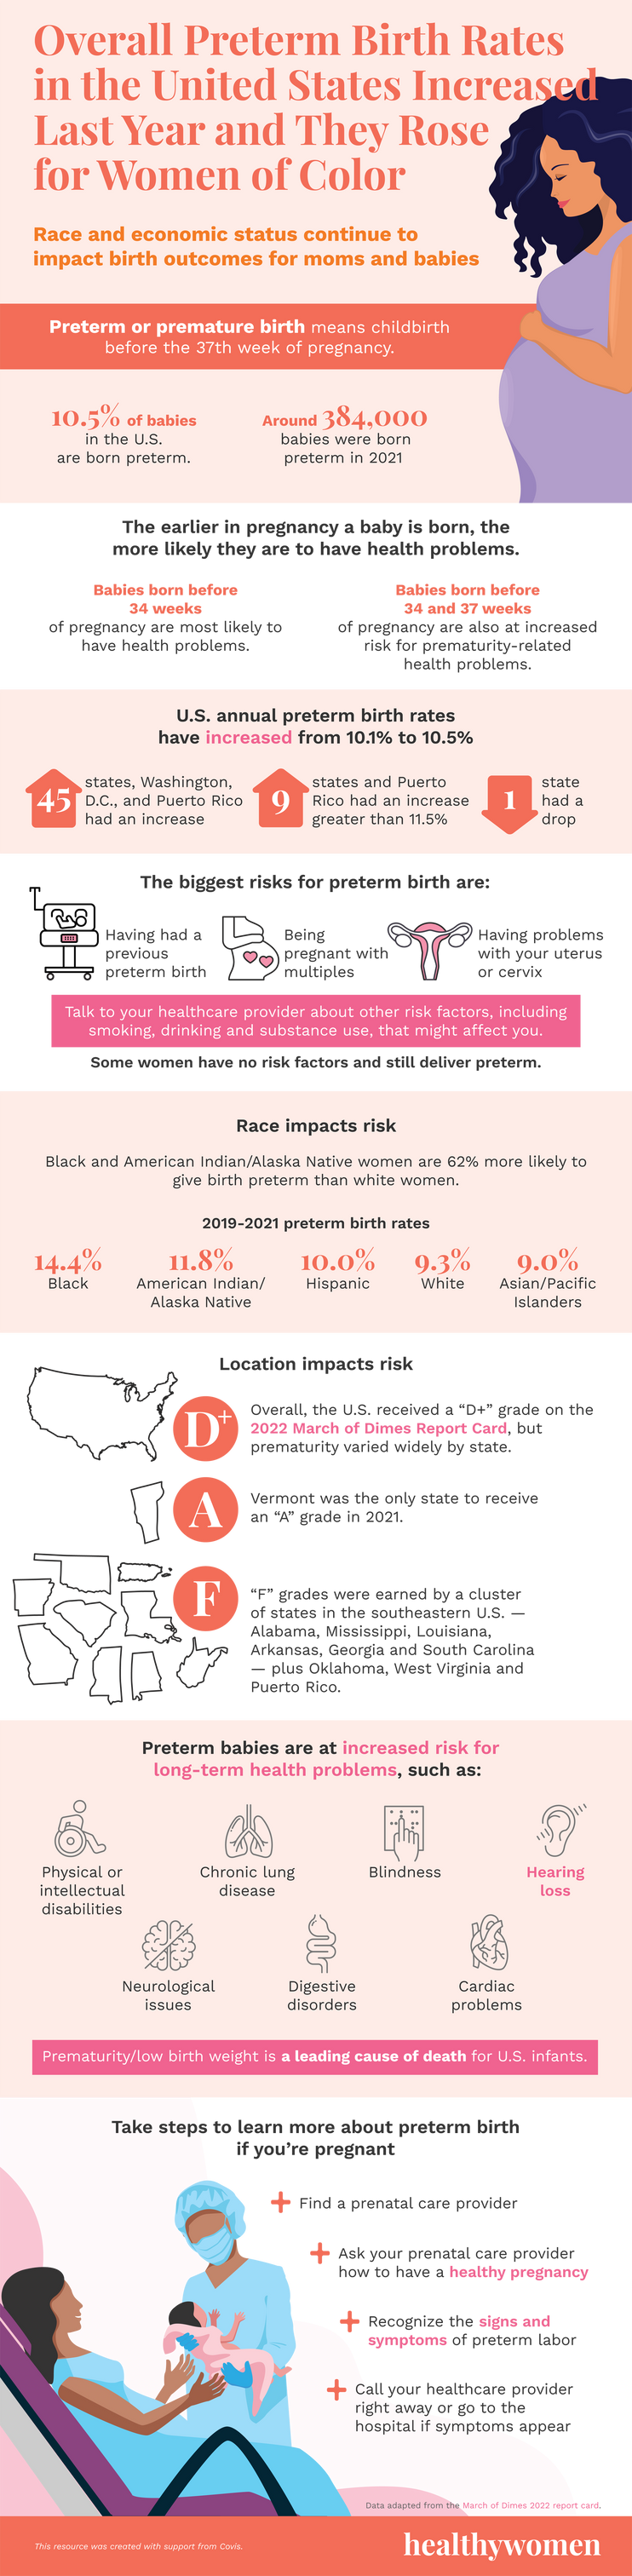 https://www.healthywomen.org/media-library/infographic-overall-preterm-birth-rates-in-the-united-states-increased-last-year-u2014-and-they-rose-for-women-of-color-click.png?id=32931042&width=742&quality=85